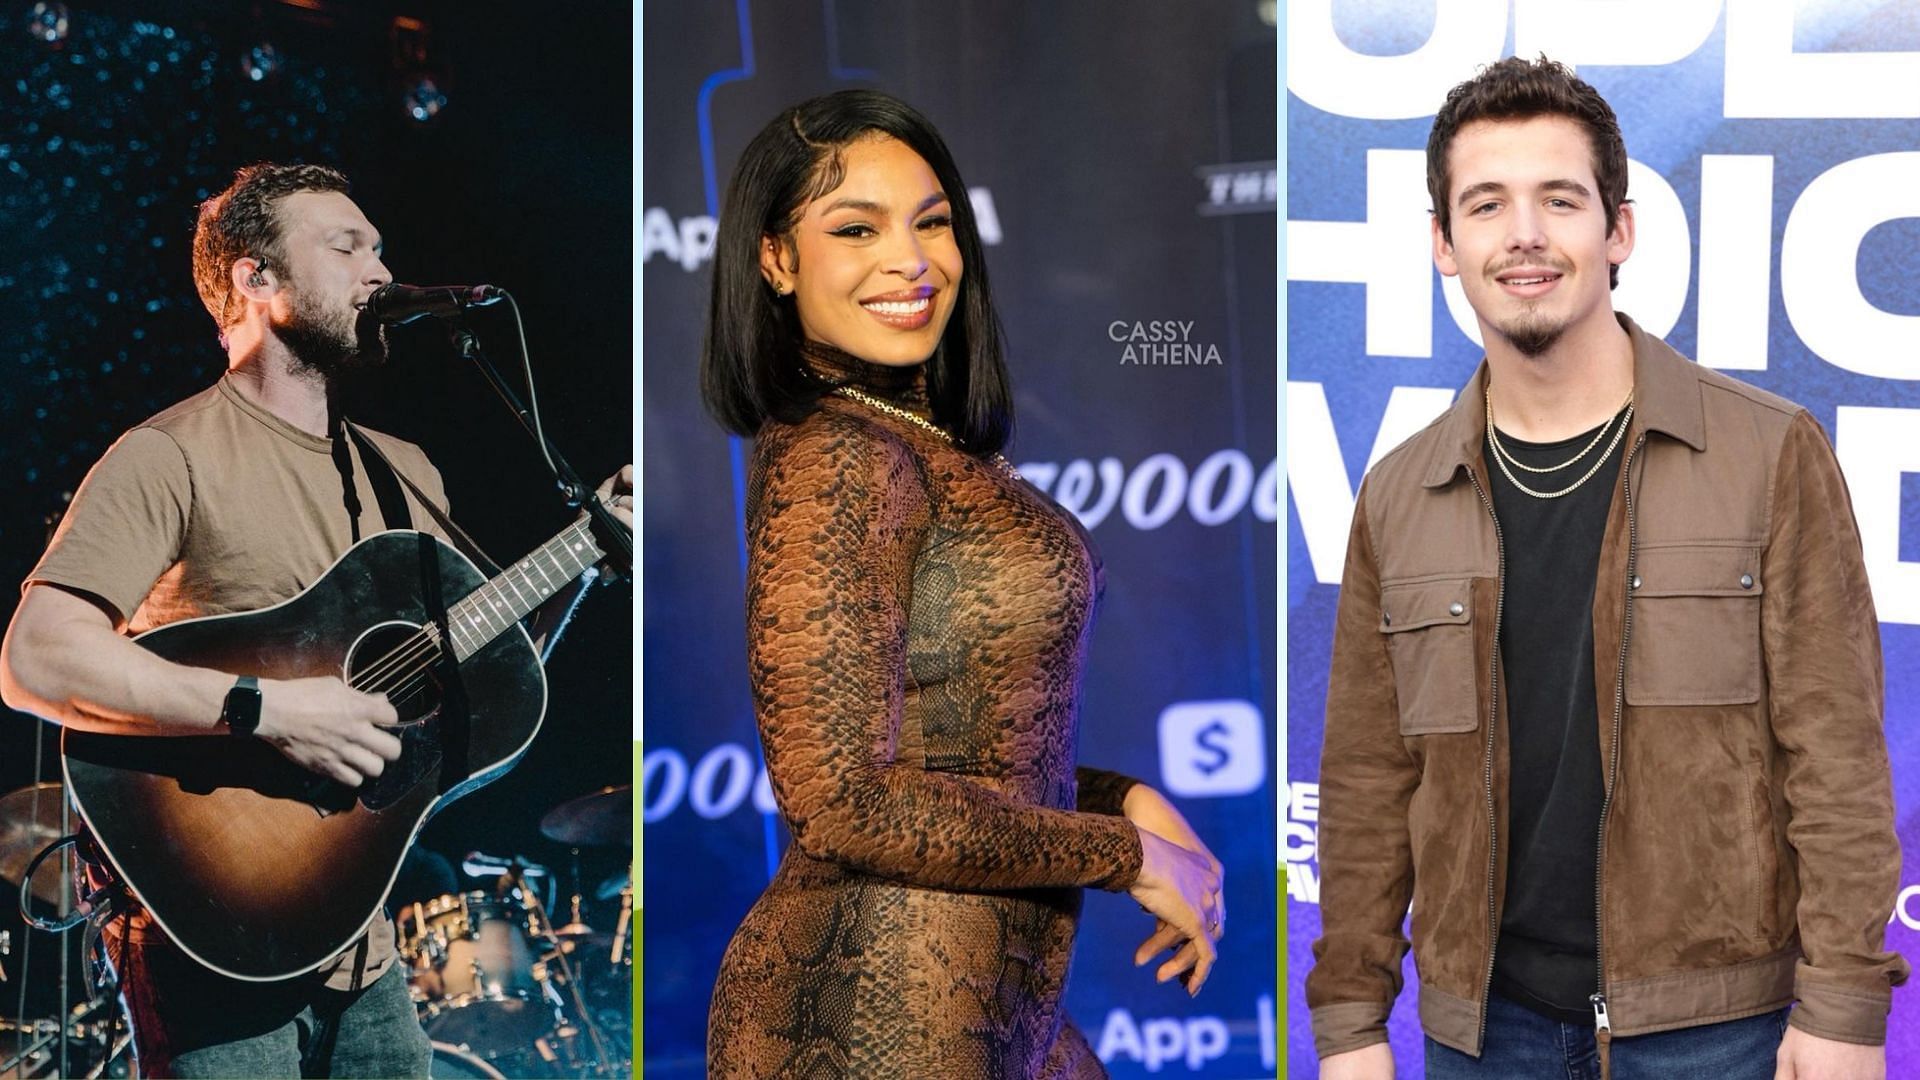 Many American Idol alums will mentor the season 21 contestants